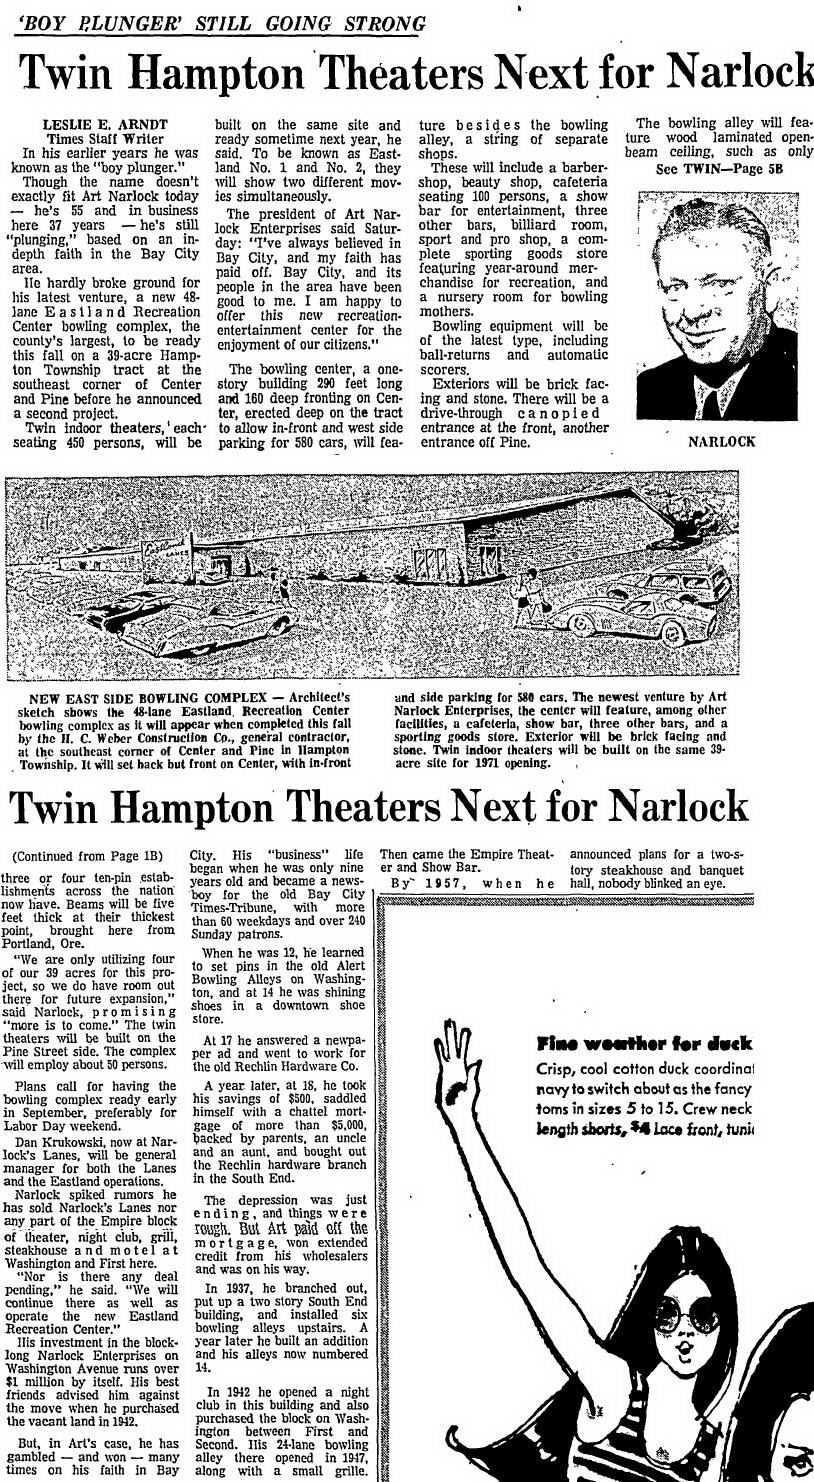 Eastland Twin Theatres - APRIL 12 1970 ARTICLE ANNOUNCING THEATER CONSTRUCTION